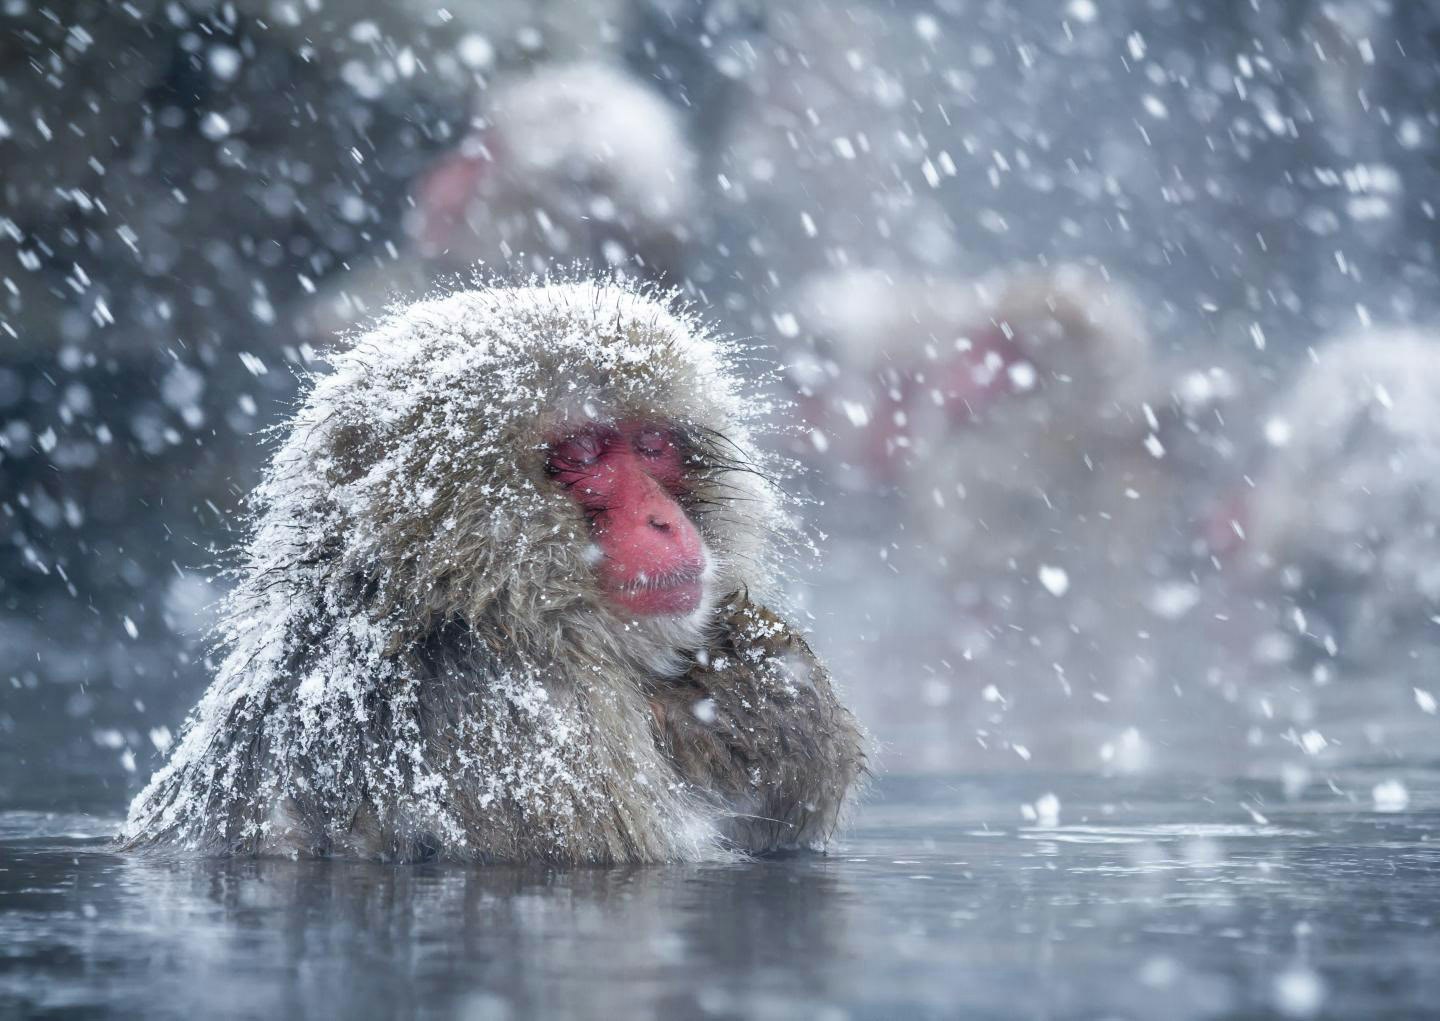 Sccientists discover why snow monkeys like hot baths